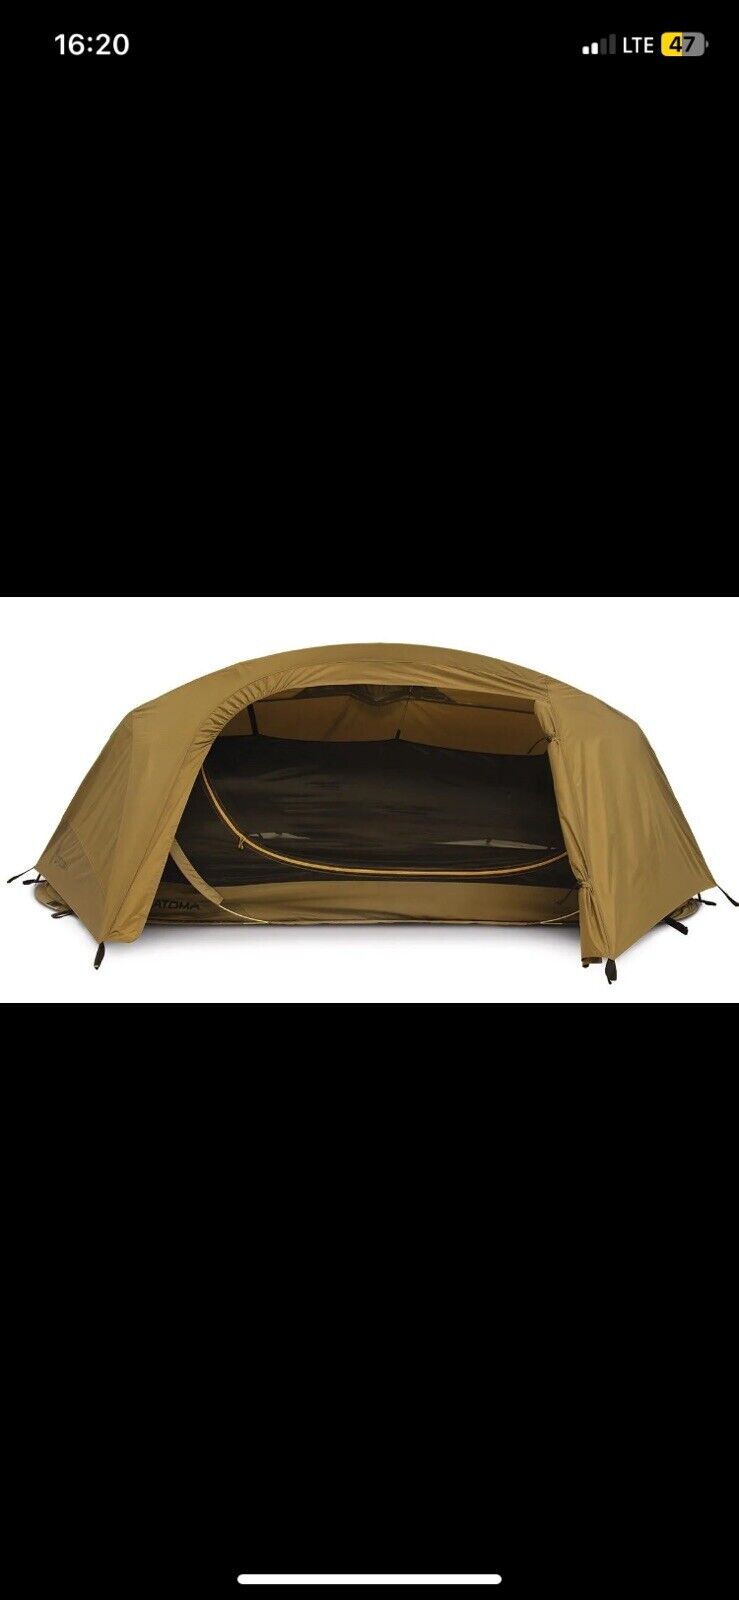 Catoma Wolverine EBNS 1 Person Tent Bednet And Rainfly Combo In Coyote Brown